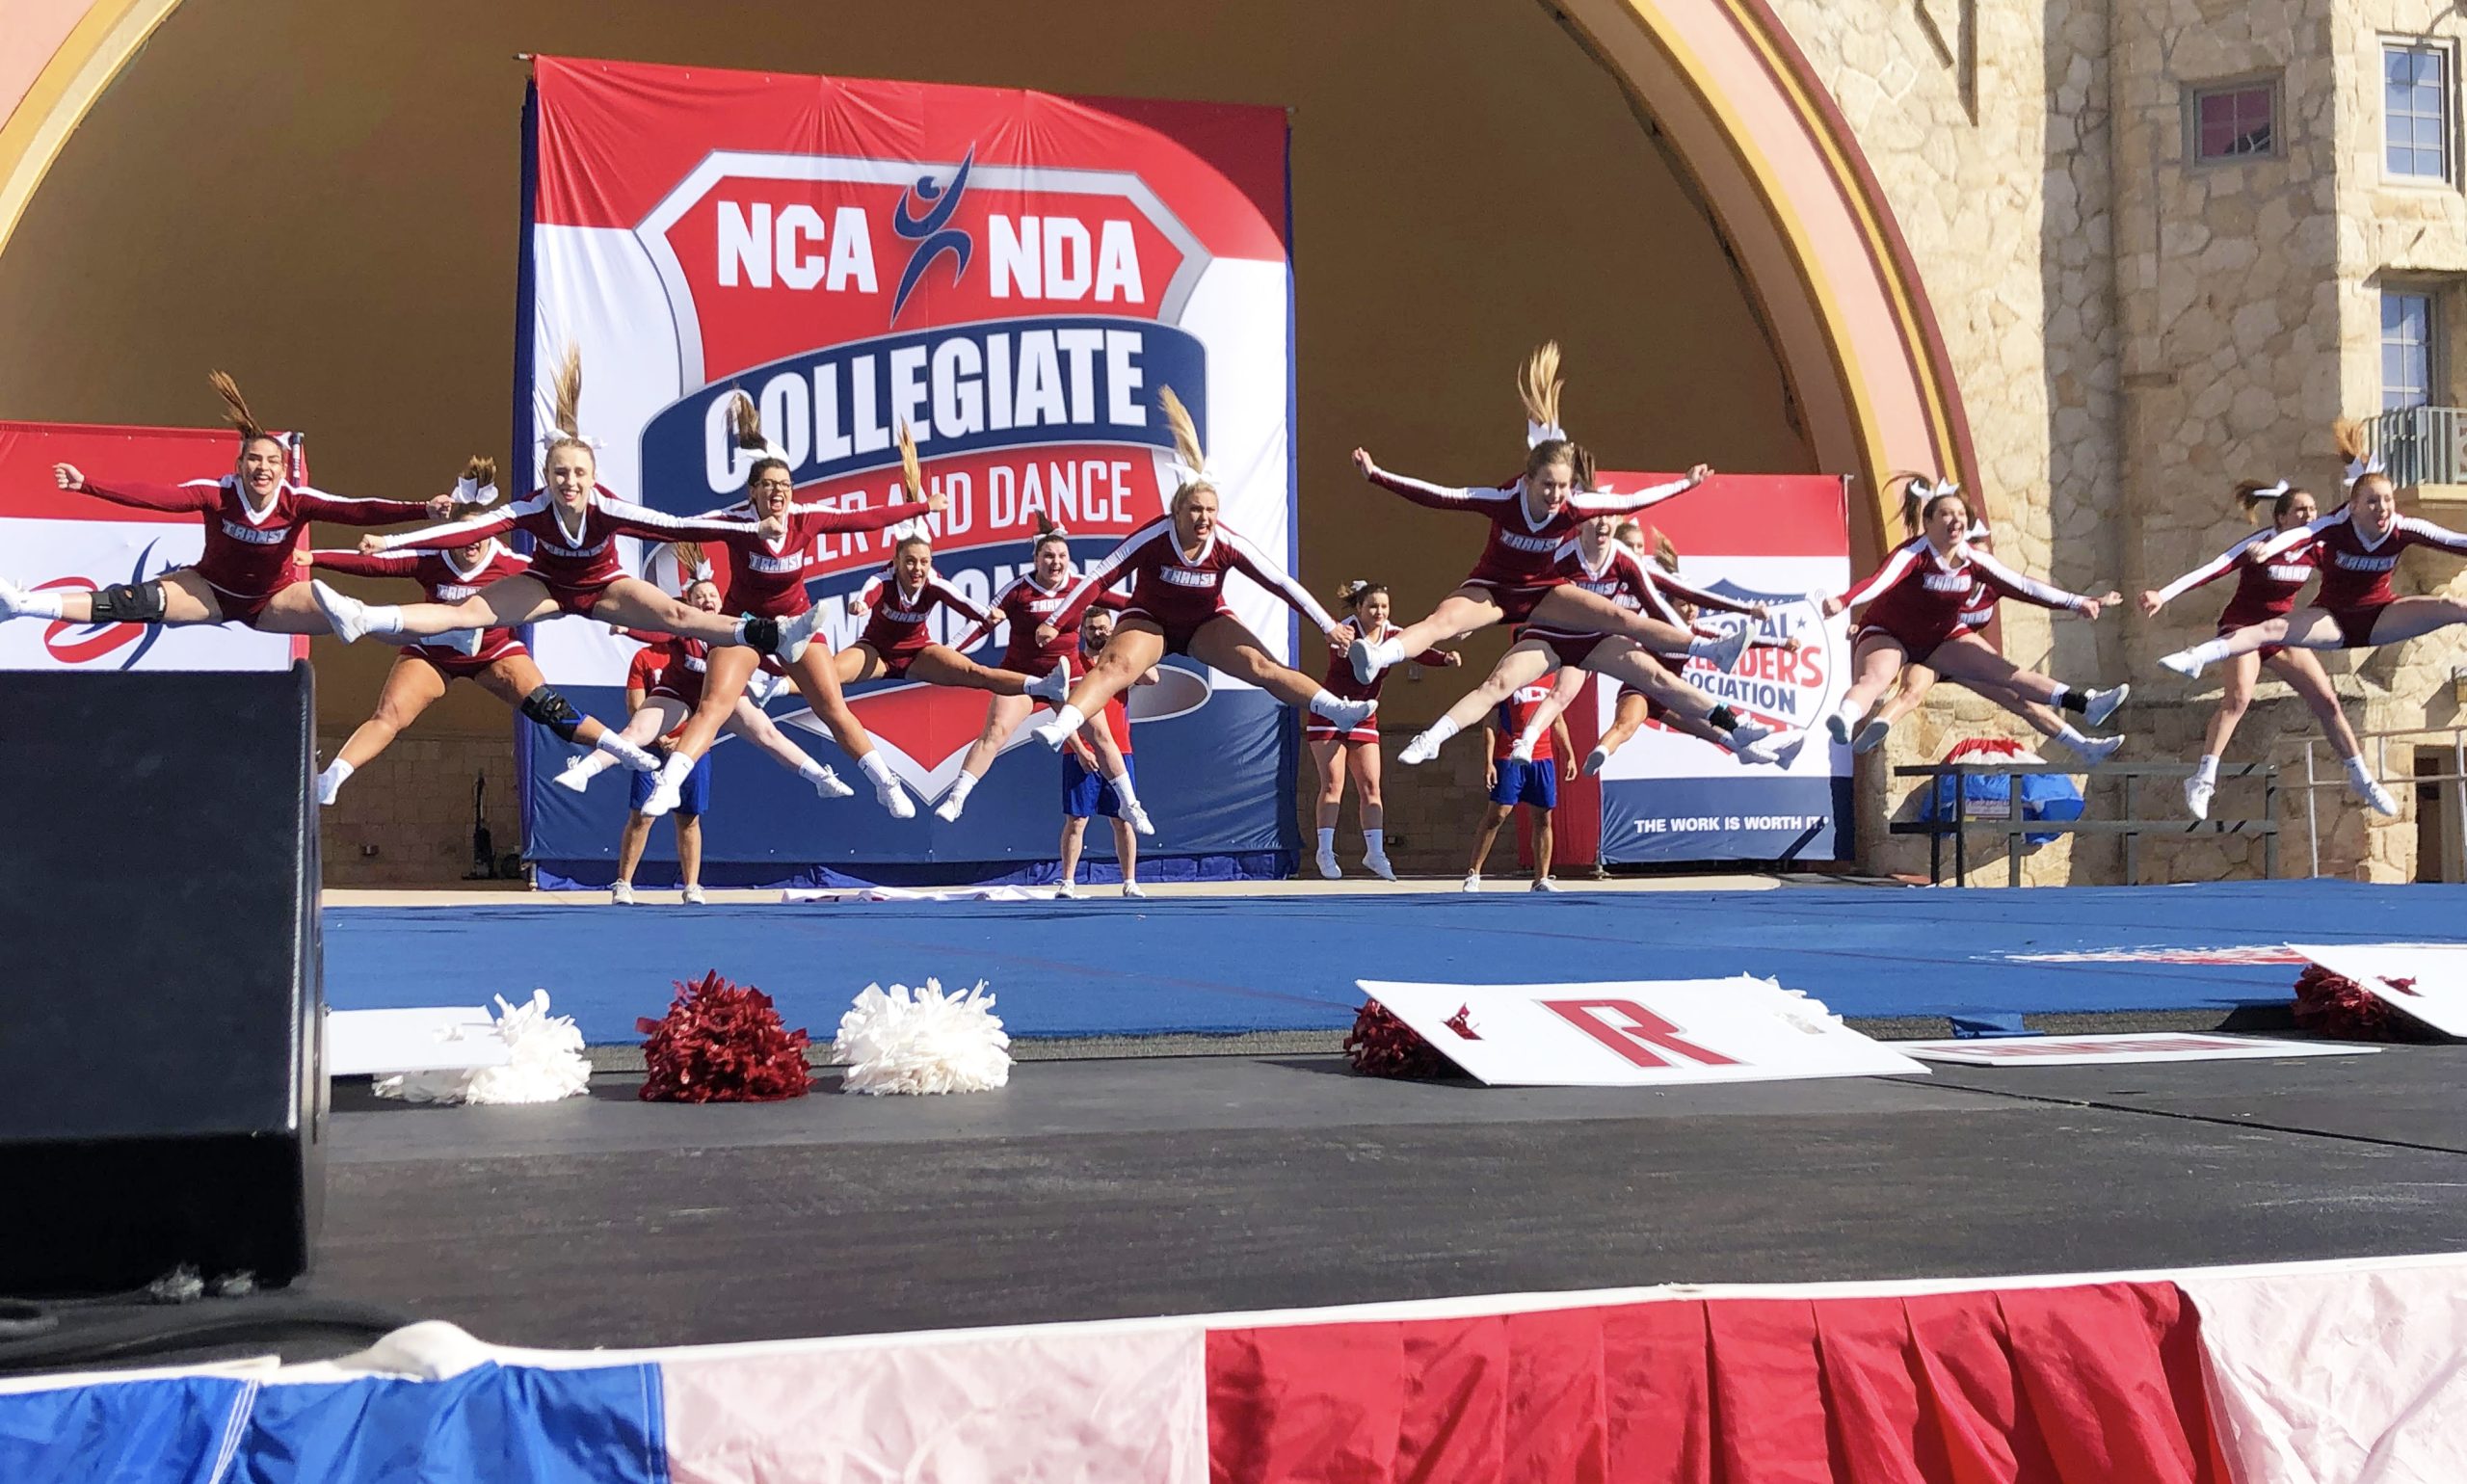 Transylvania cheer team records highest finish ever at 2019 NCA Collegiate National Championships